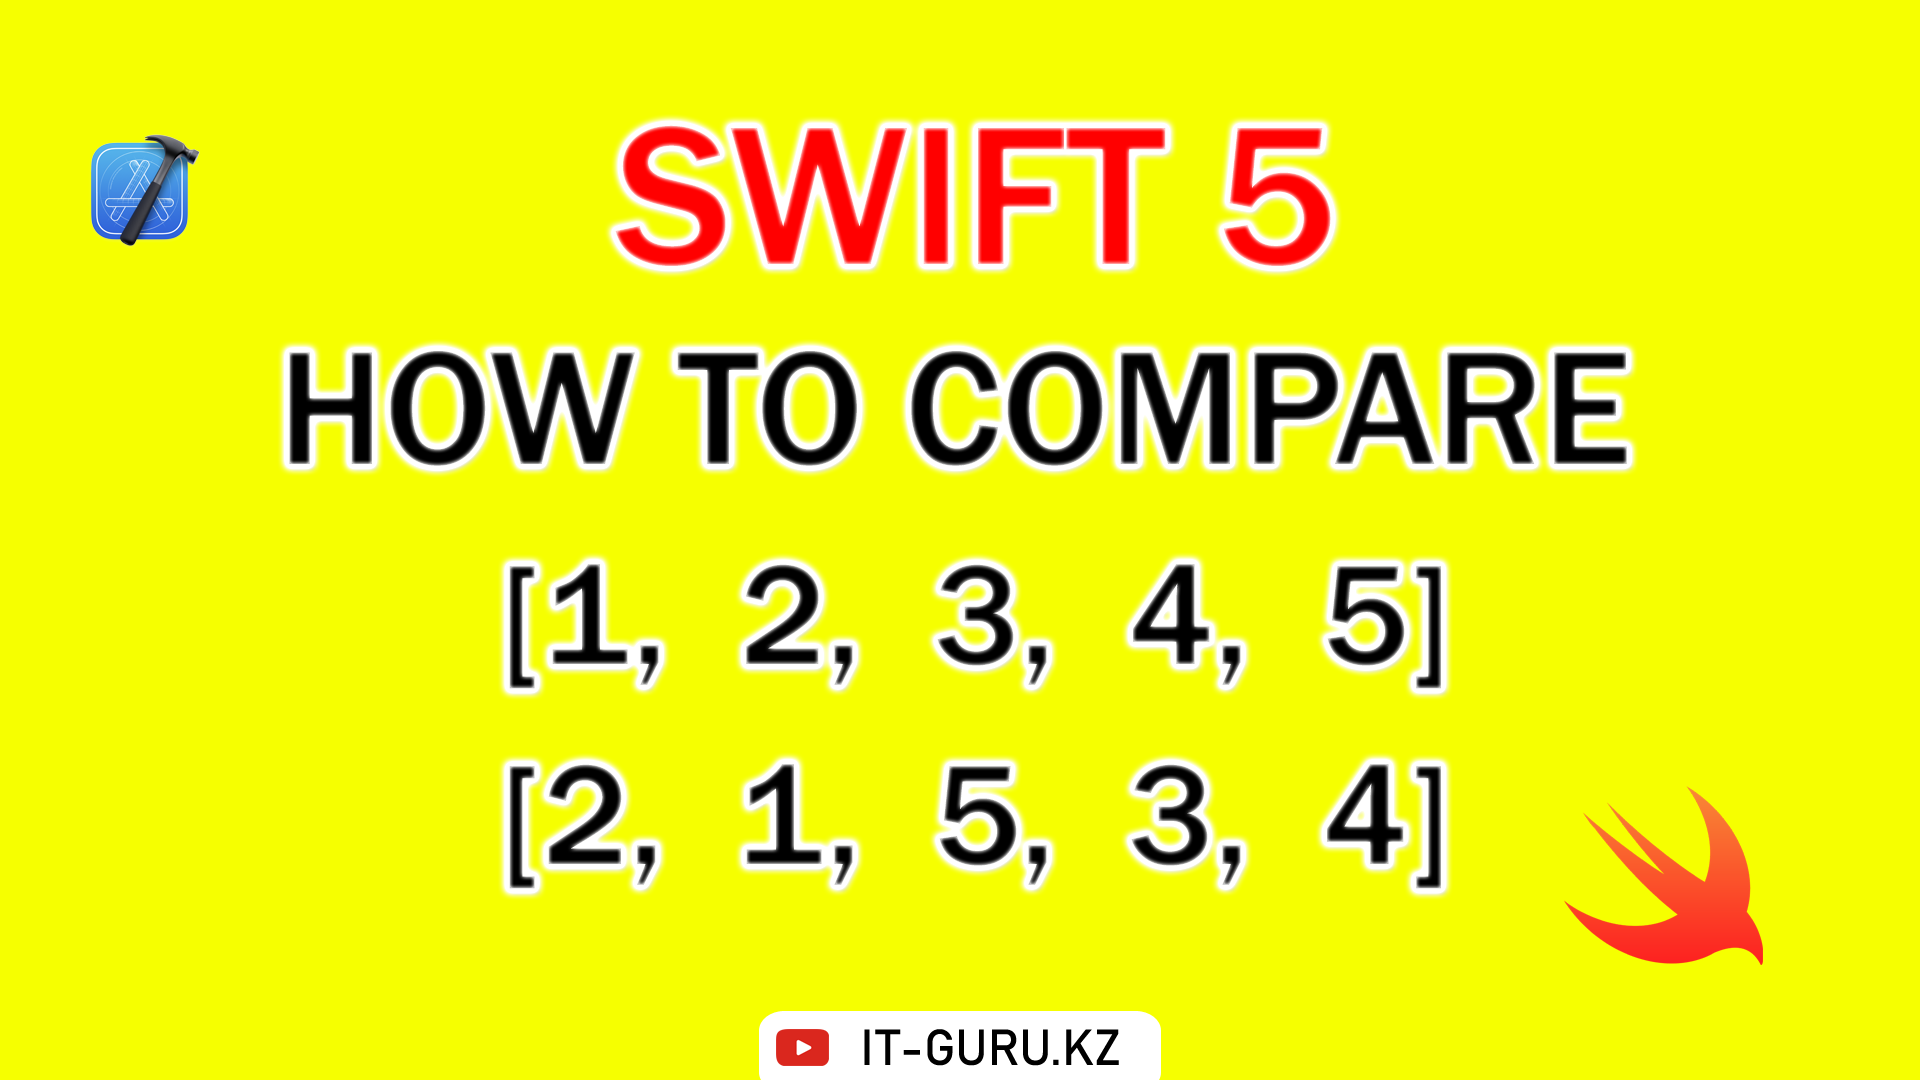 How to compare 2 arrays in Swift 5